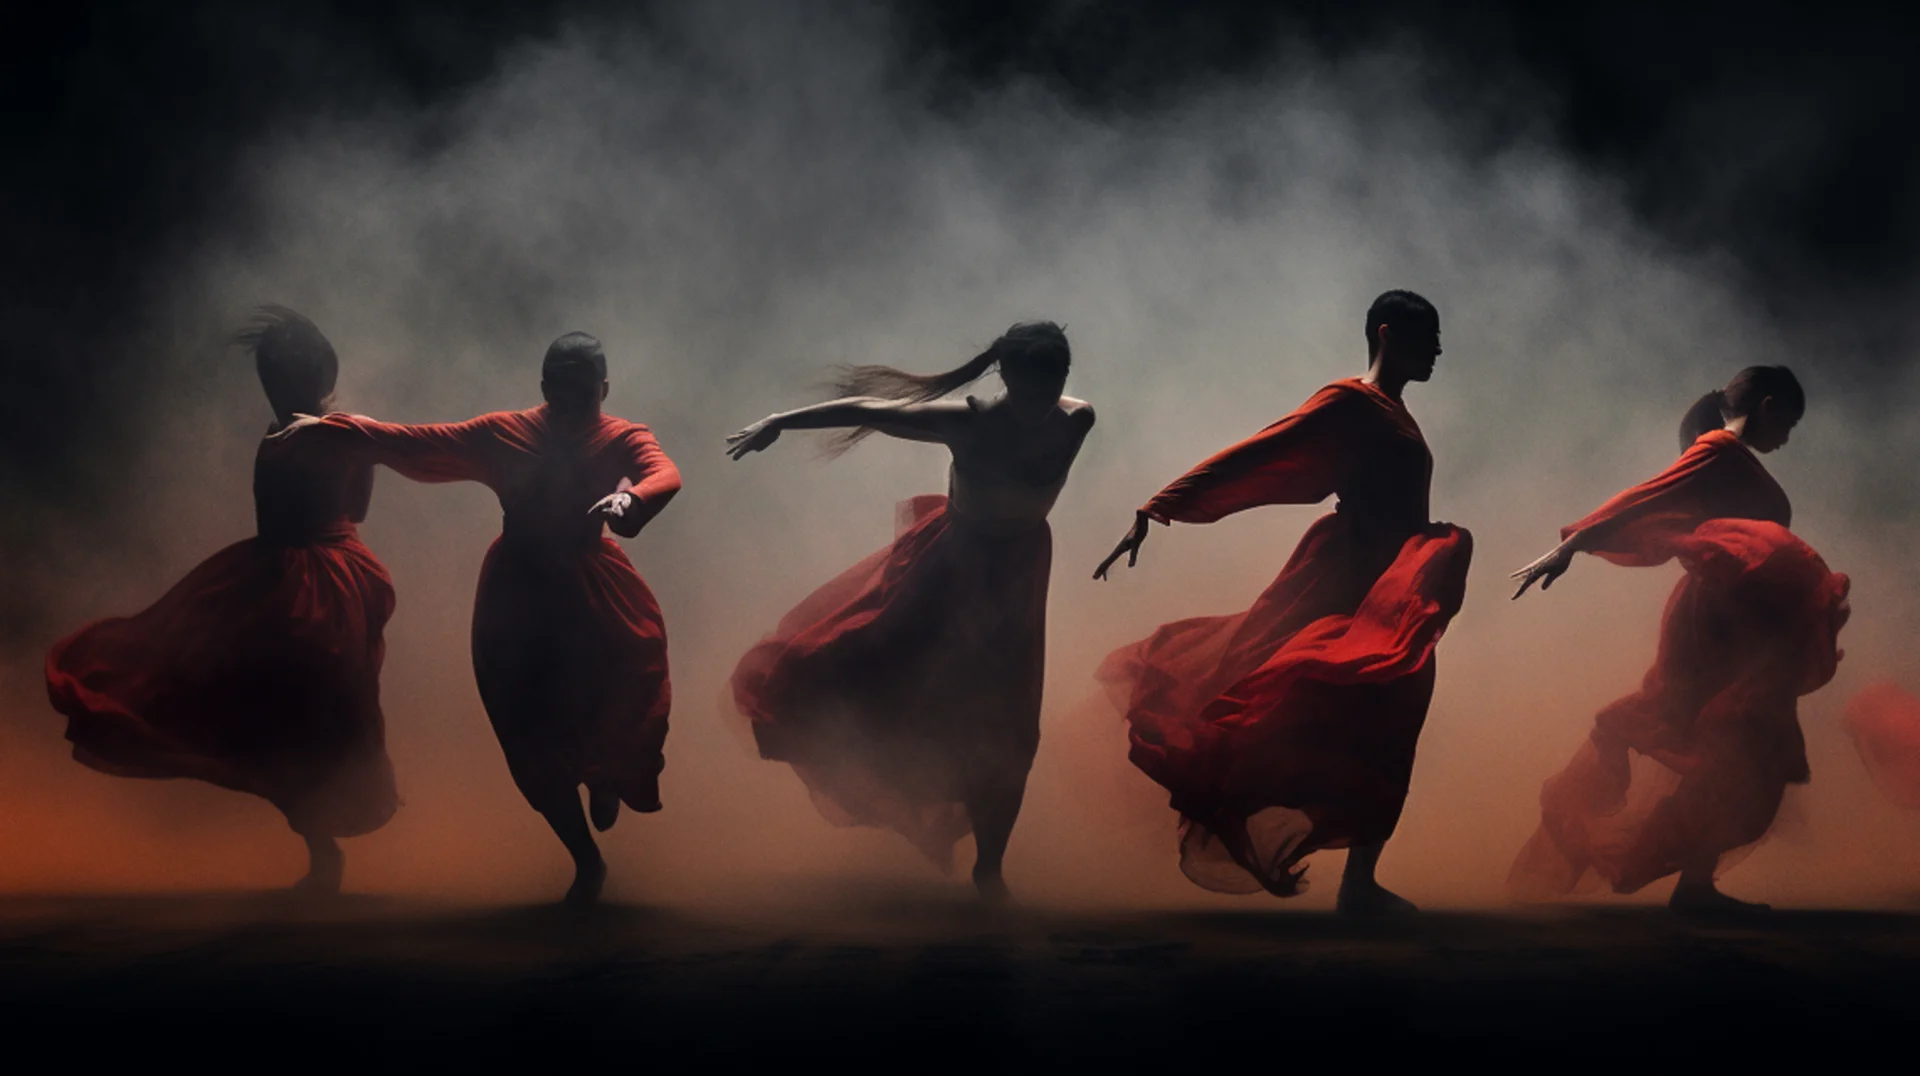 Dancers in their red costumes run on stage, smoke in the air.